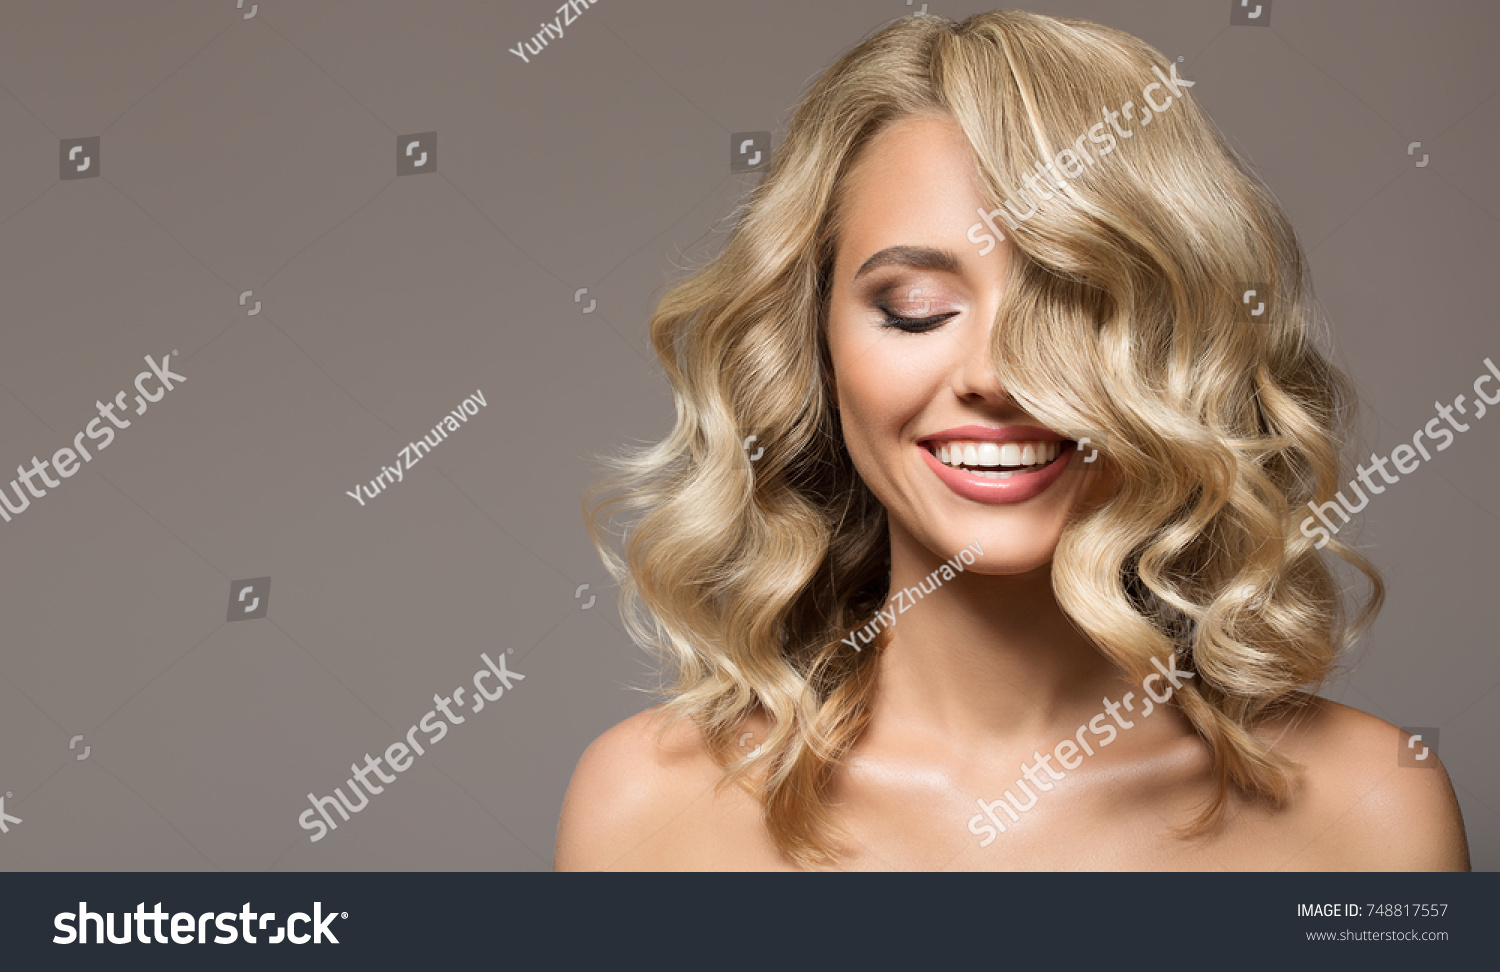 Blonde woman with curly beautiful hair smiling on gray background.  #748817557